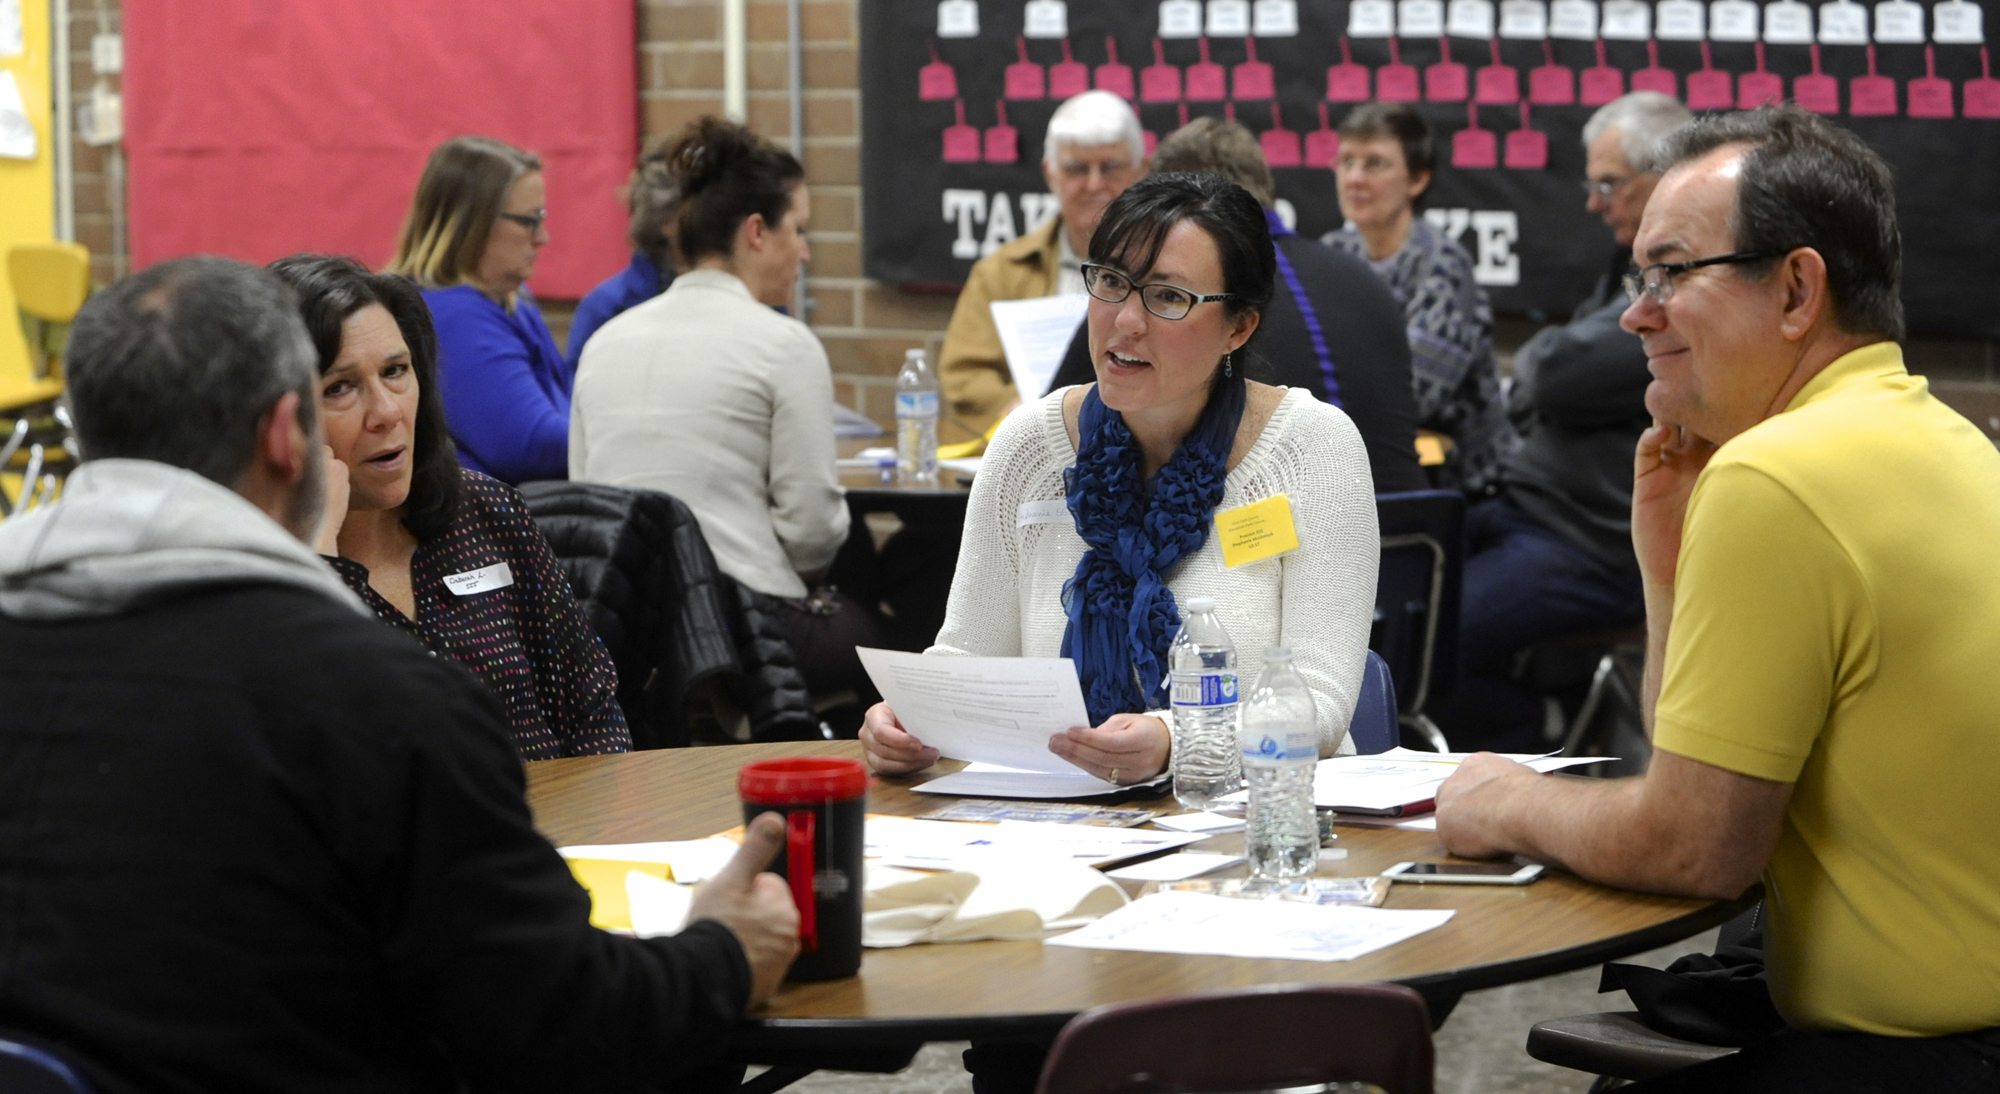 Stephanie McClintock, center, talks with other members at the GOP precinct caucus at Prairie High School on Saturday. McClintock said she hopes to see local Republicans work together this year to uphold conservative principles.